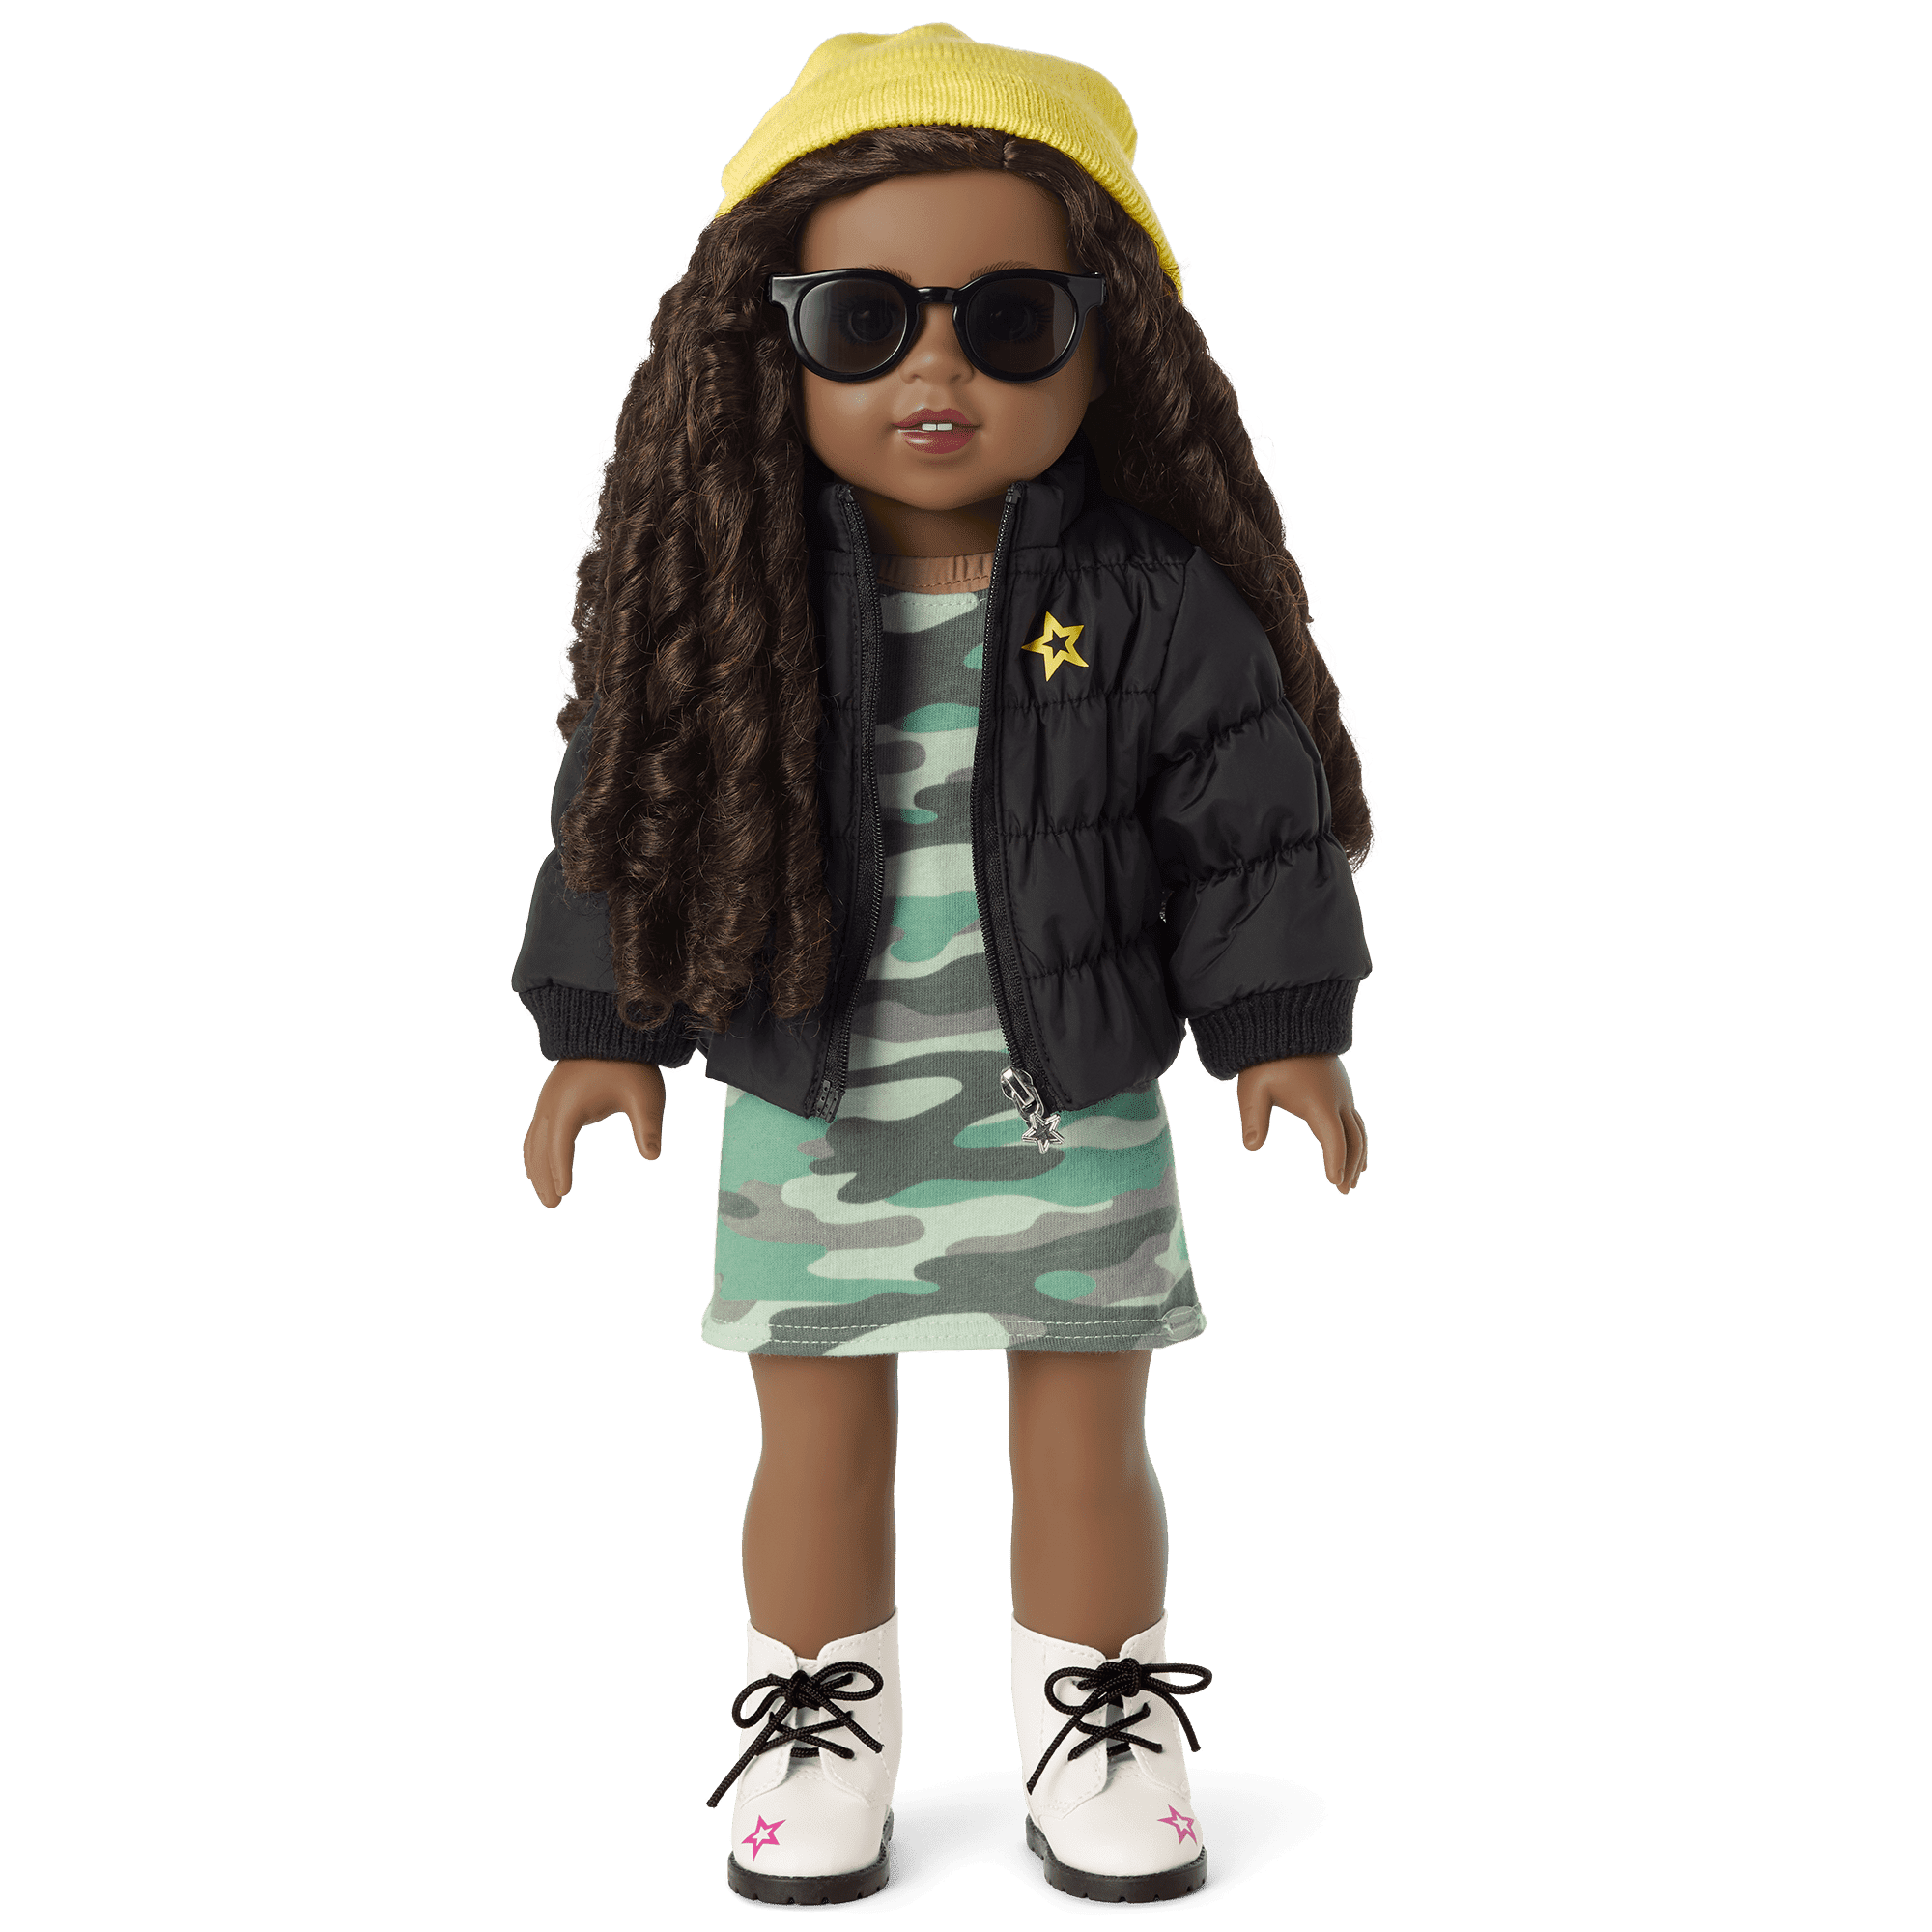 Show Your Strong Side Accessories for 18-inch Dolls